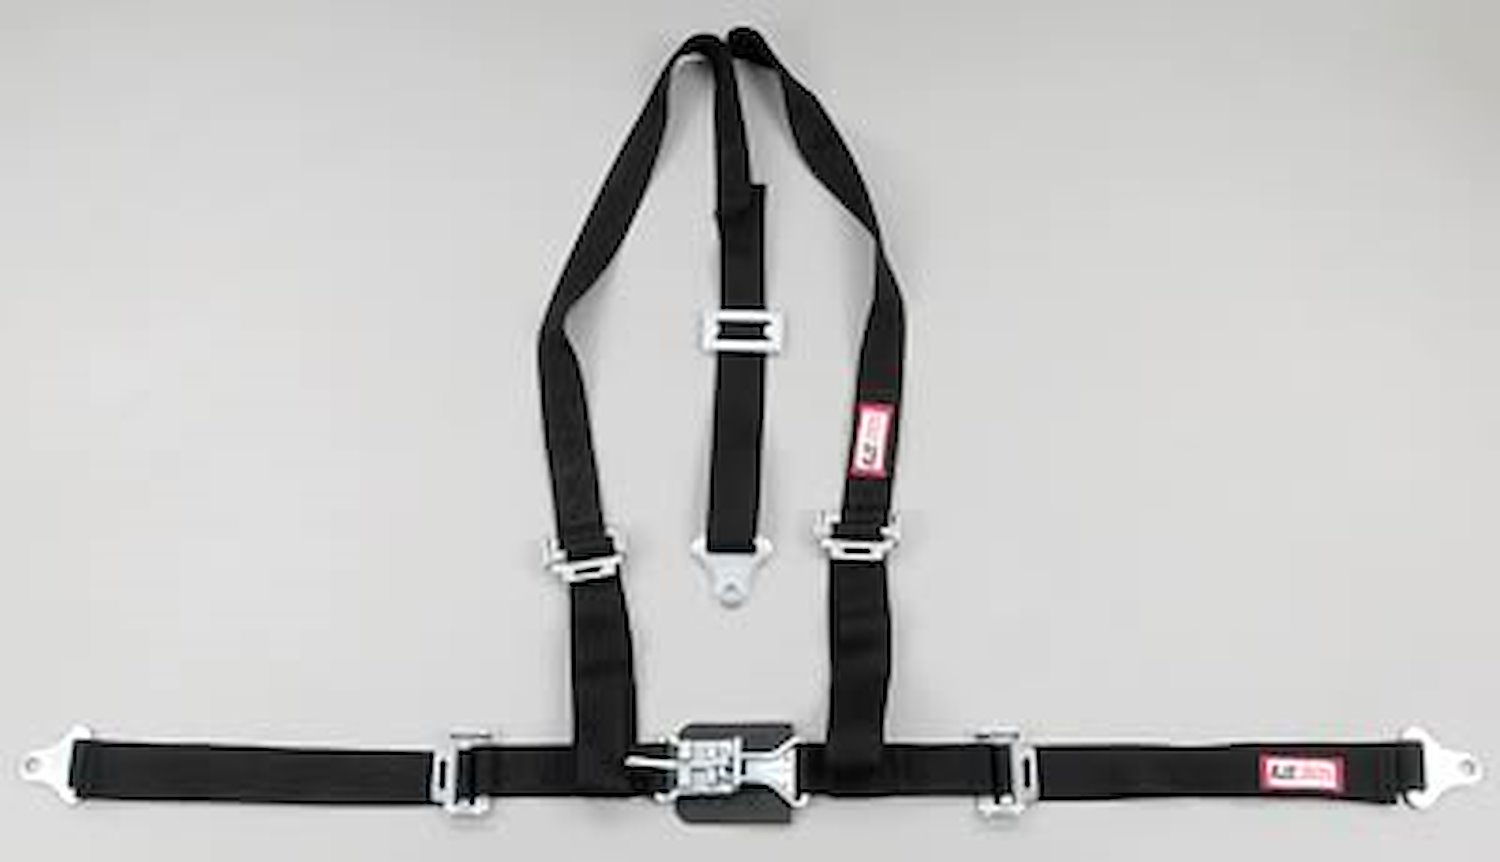 NON-SFI L&L HARNESS 3 PULL UP Lap Belt SNAP SEWN IN 2 S.H. Individual FLOOR Mount WRAP/BOLT PURPLE